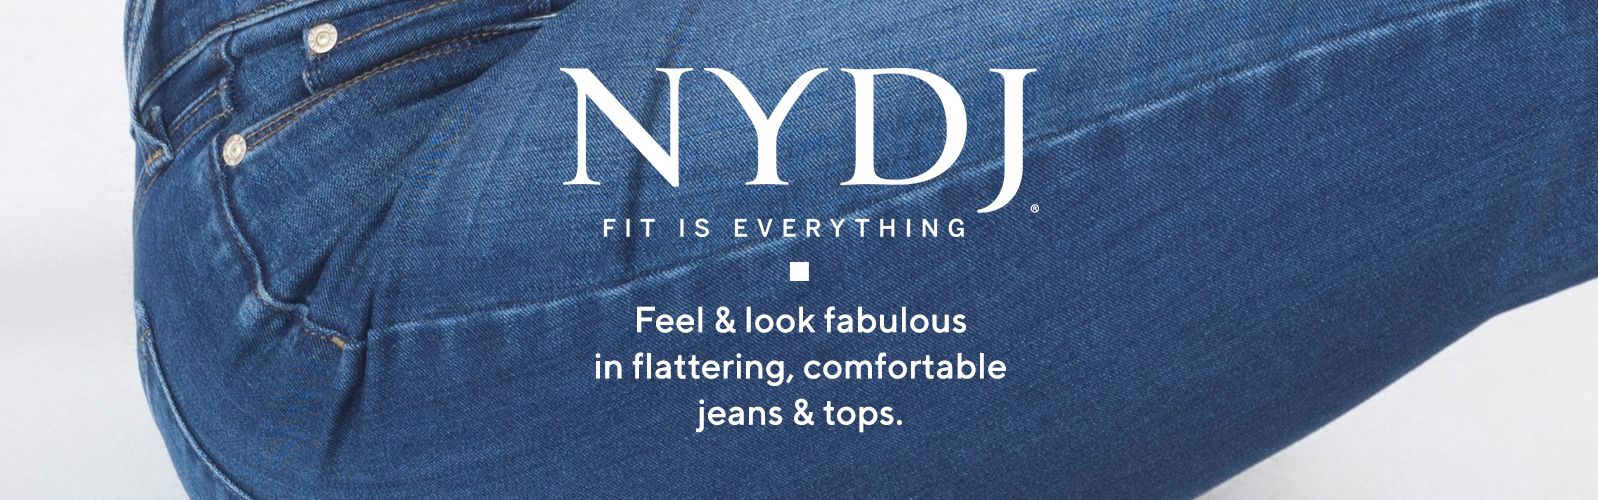 nydj fit is everything